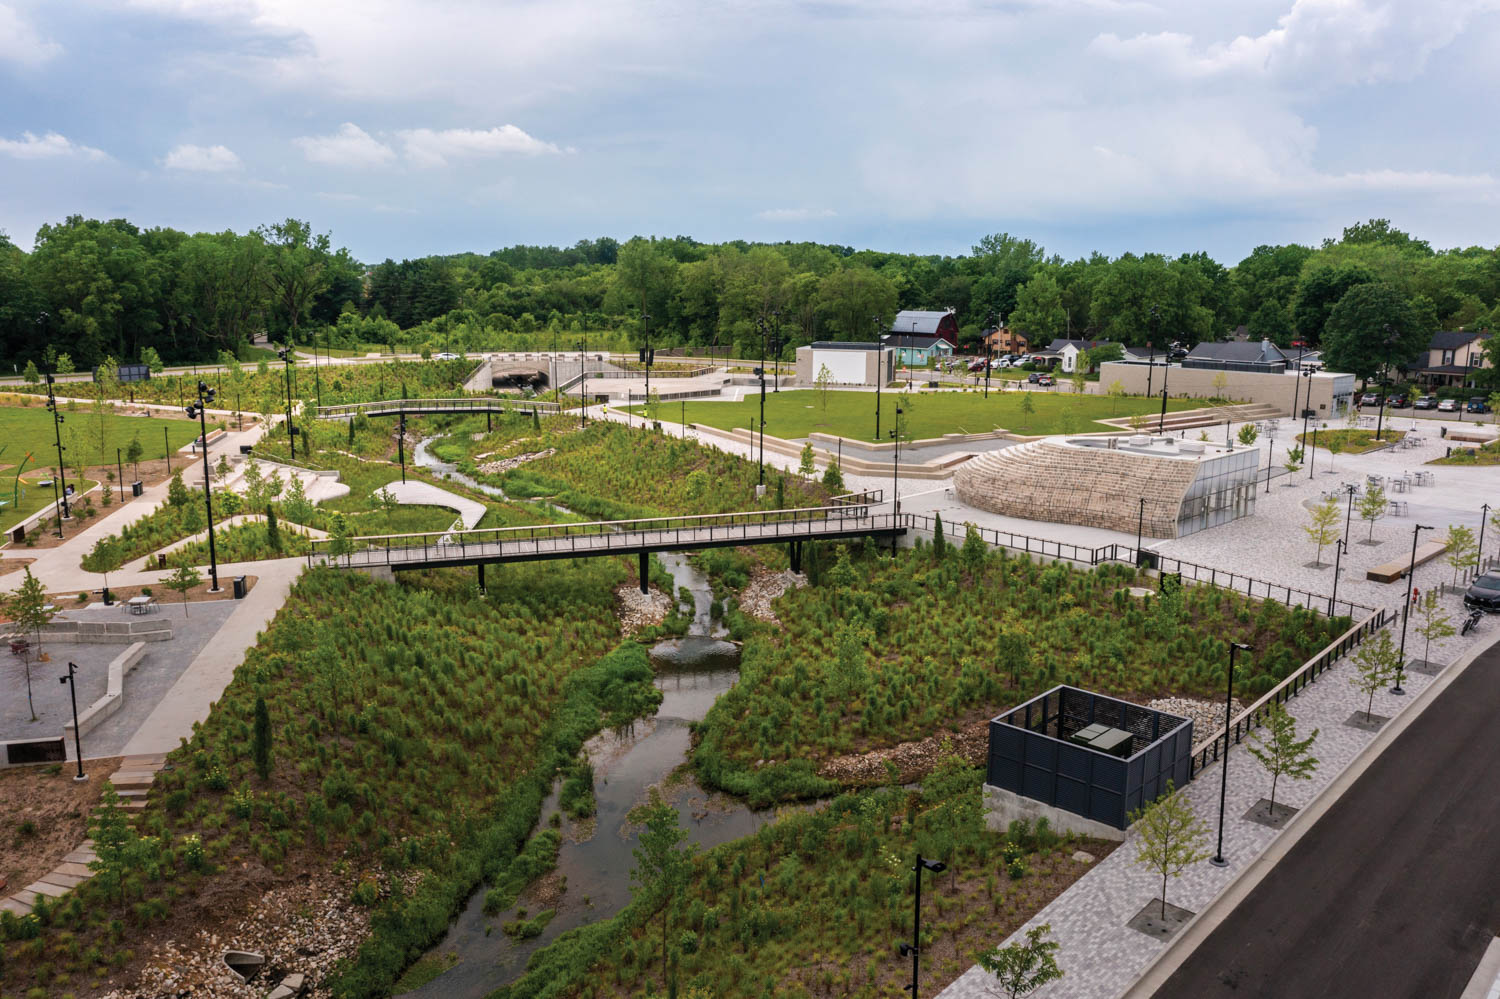 bridges connect grassy areas throughout an outdoor plaza